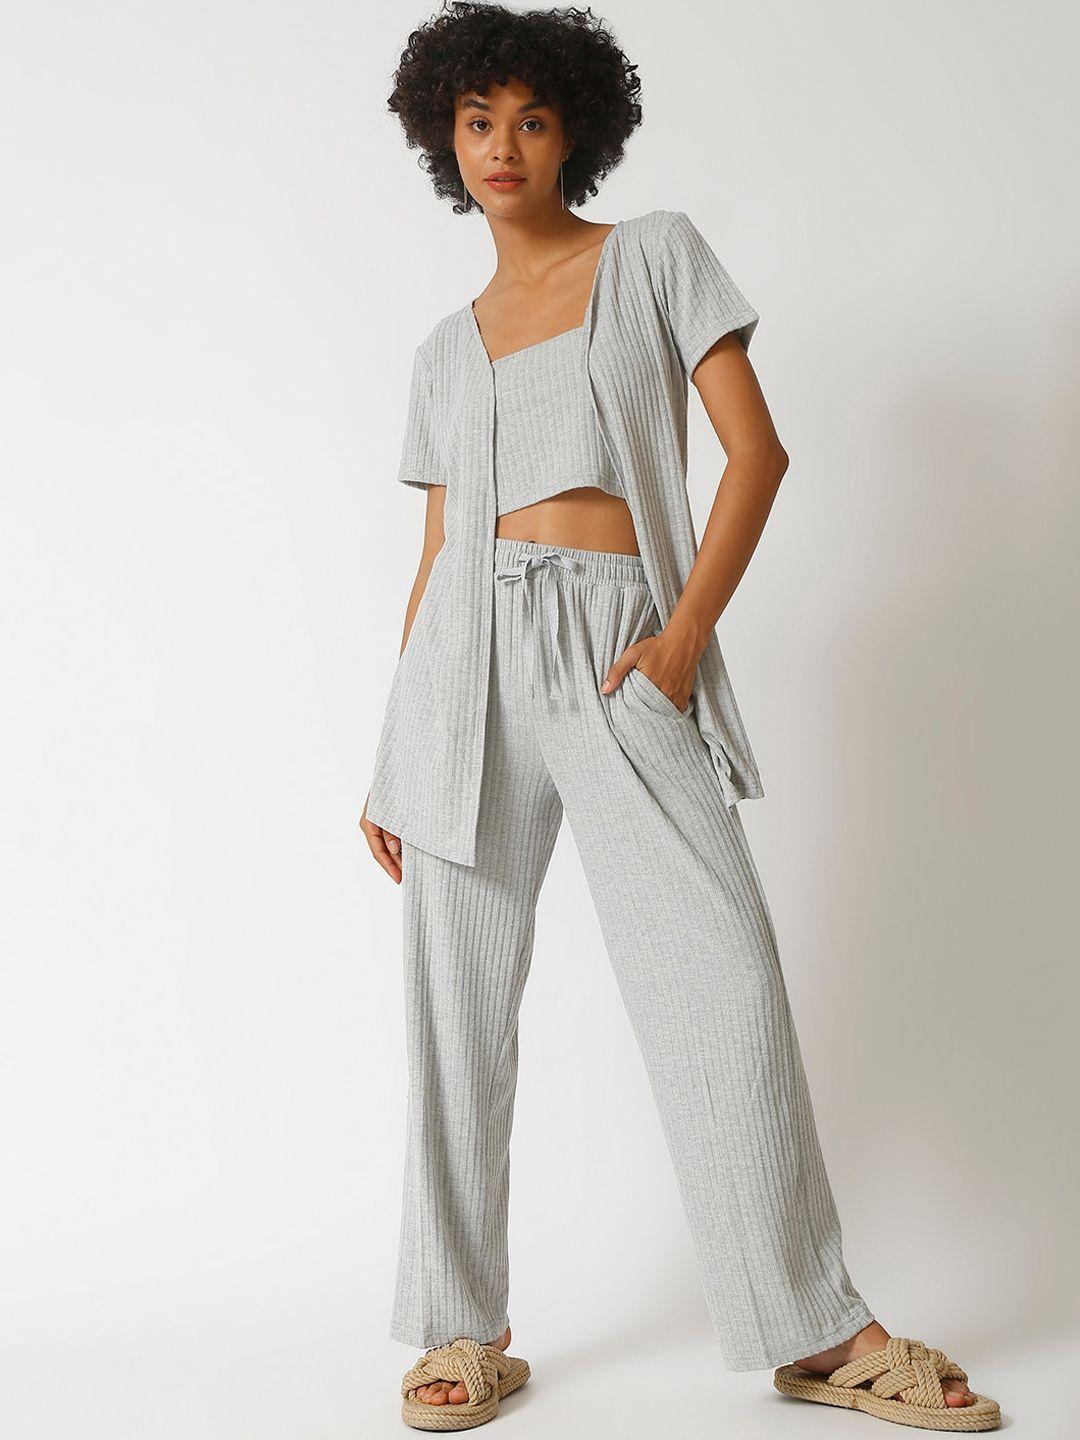 campus sutra women grey 3 piece co-ord set